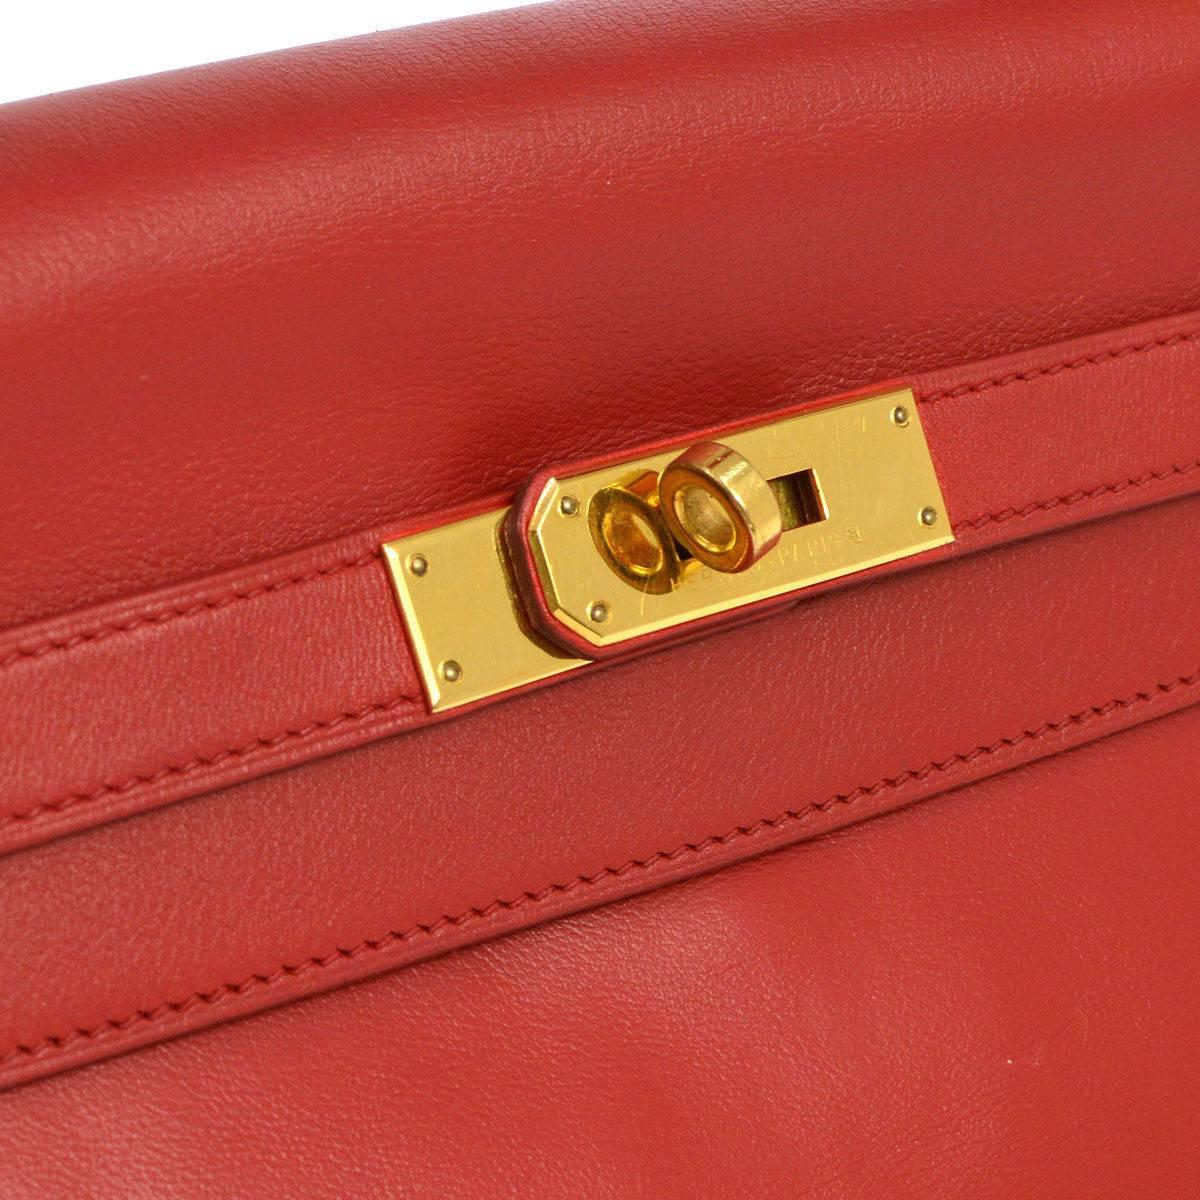 Hermes Kelly 32 Rouge Red Leather Evening Top Handle Satchel Flap Bag in Box In Excellent Condition In Chicago, IL